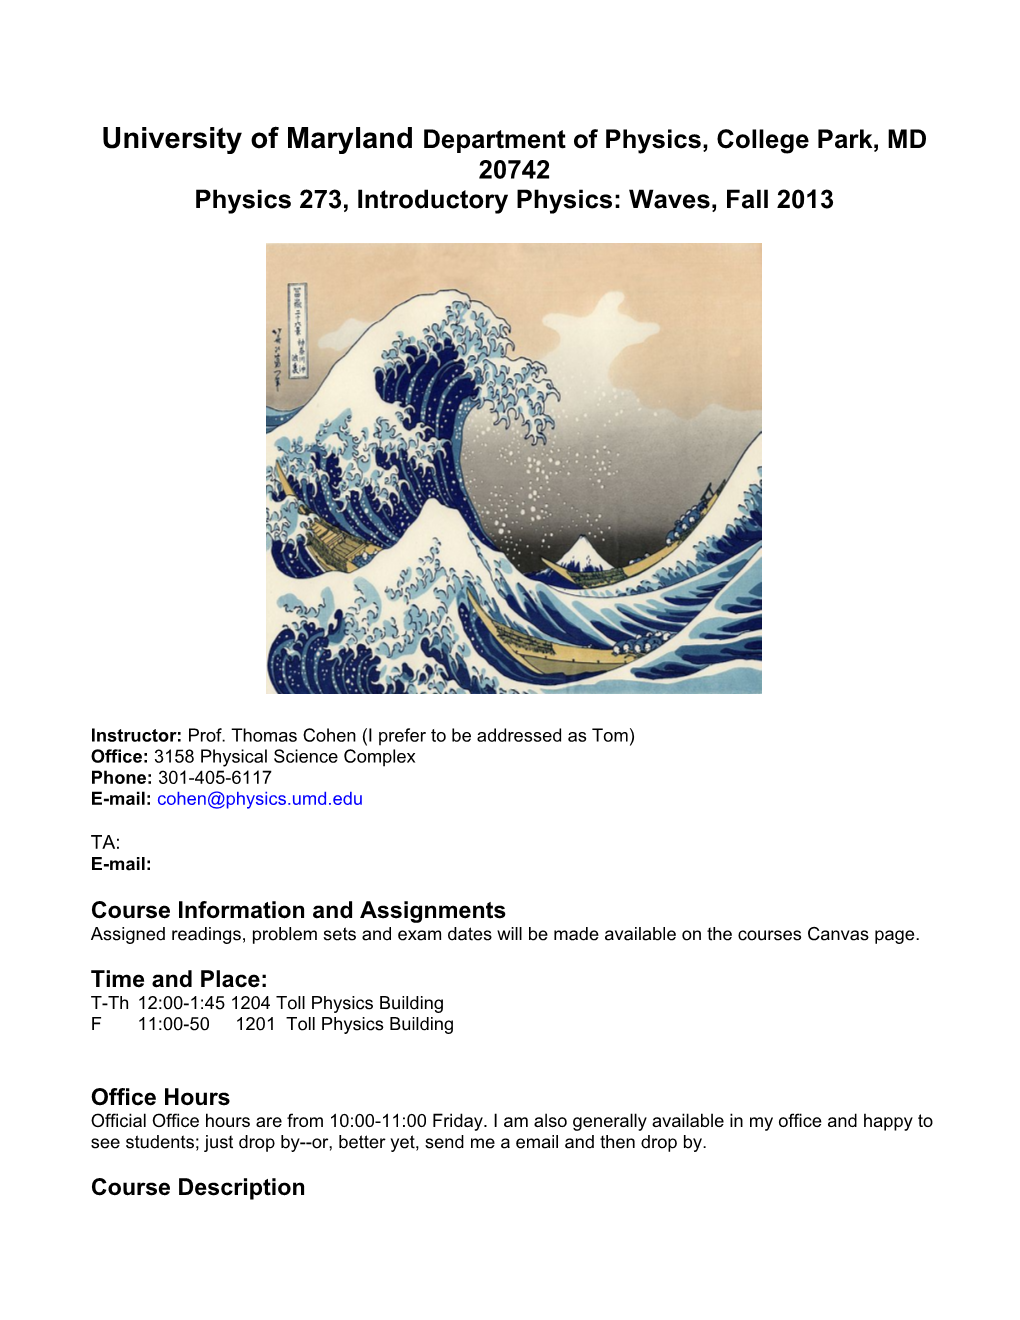 Physics 273, Introductory Physics: Waves, Fall 2013